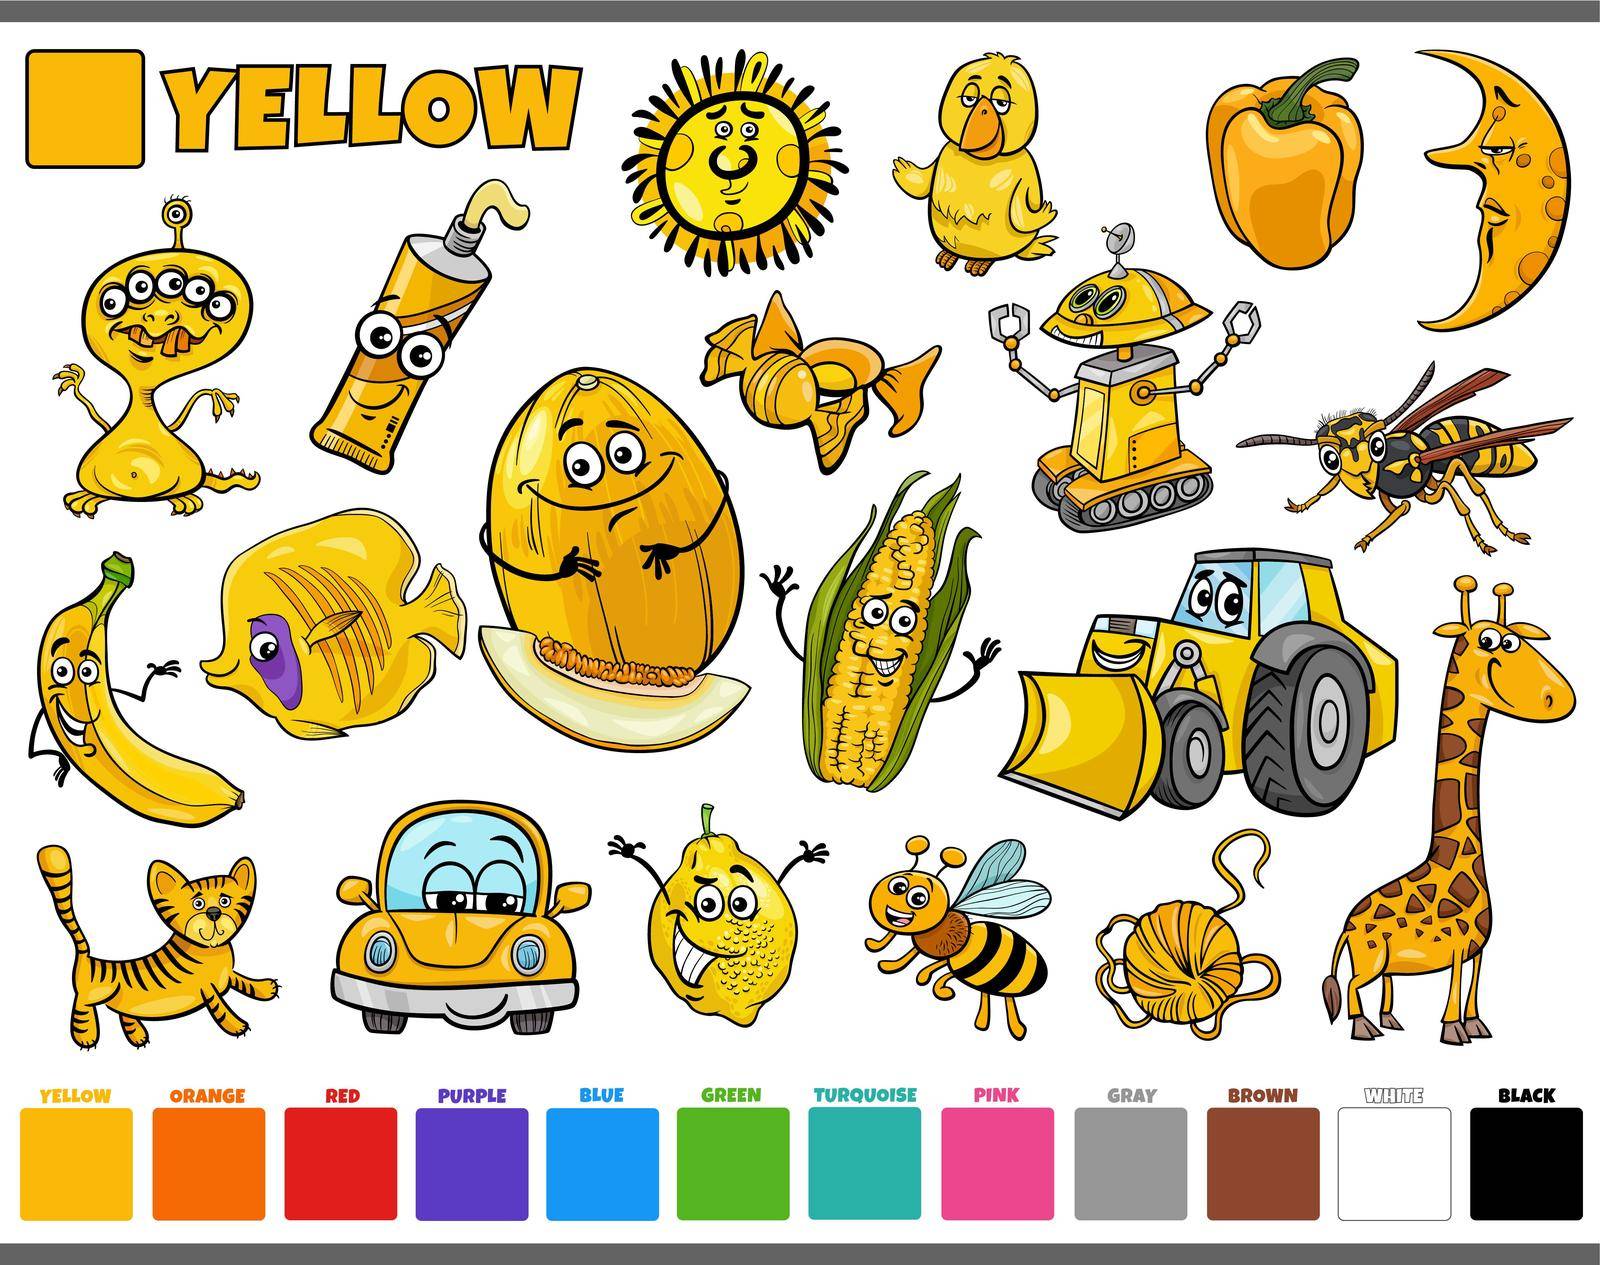 Cartoon illustration set with comic characters such as people and animals or objects in yellow